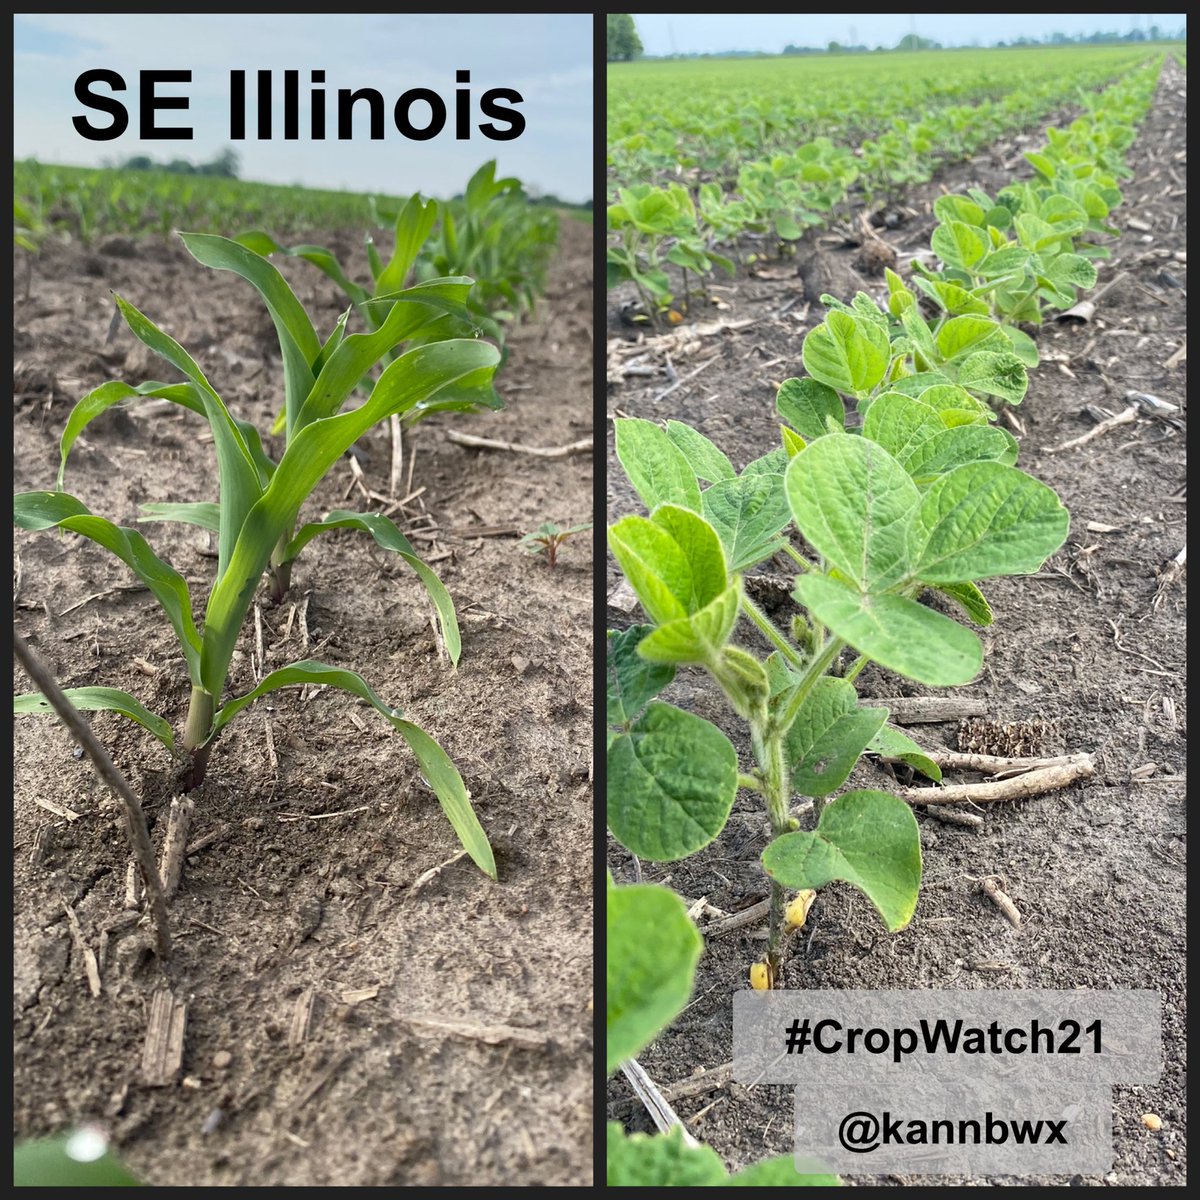 #CropWatch21 is underway. Here's a look from southeast Illinois, Indiana, Minnesota & Nebraska this weekend. The farmers are mostly happy w/ the start despite some minor issues w/ weather (too cool, too wet, too dry, etc). These fields were planted on the earlier side of normal. https://t.co/zgLhmpMfiQ